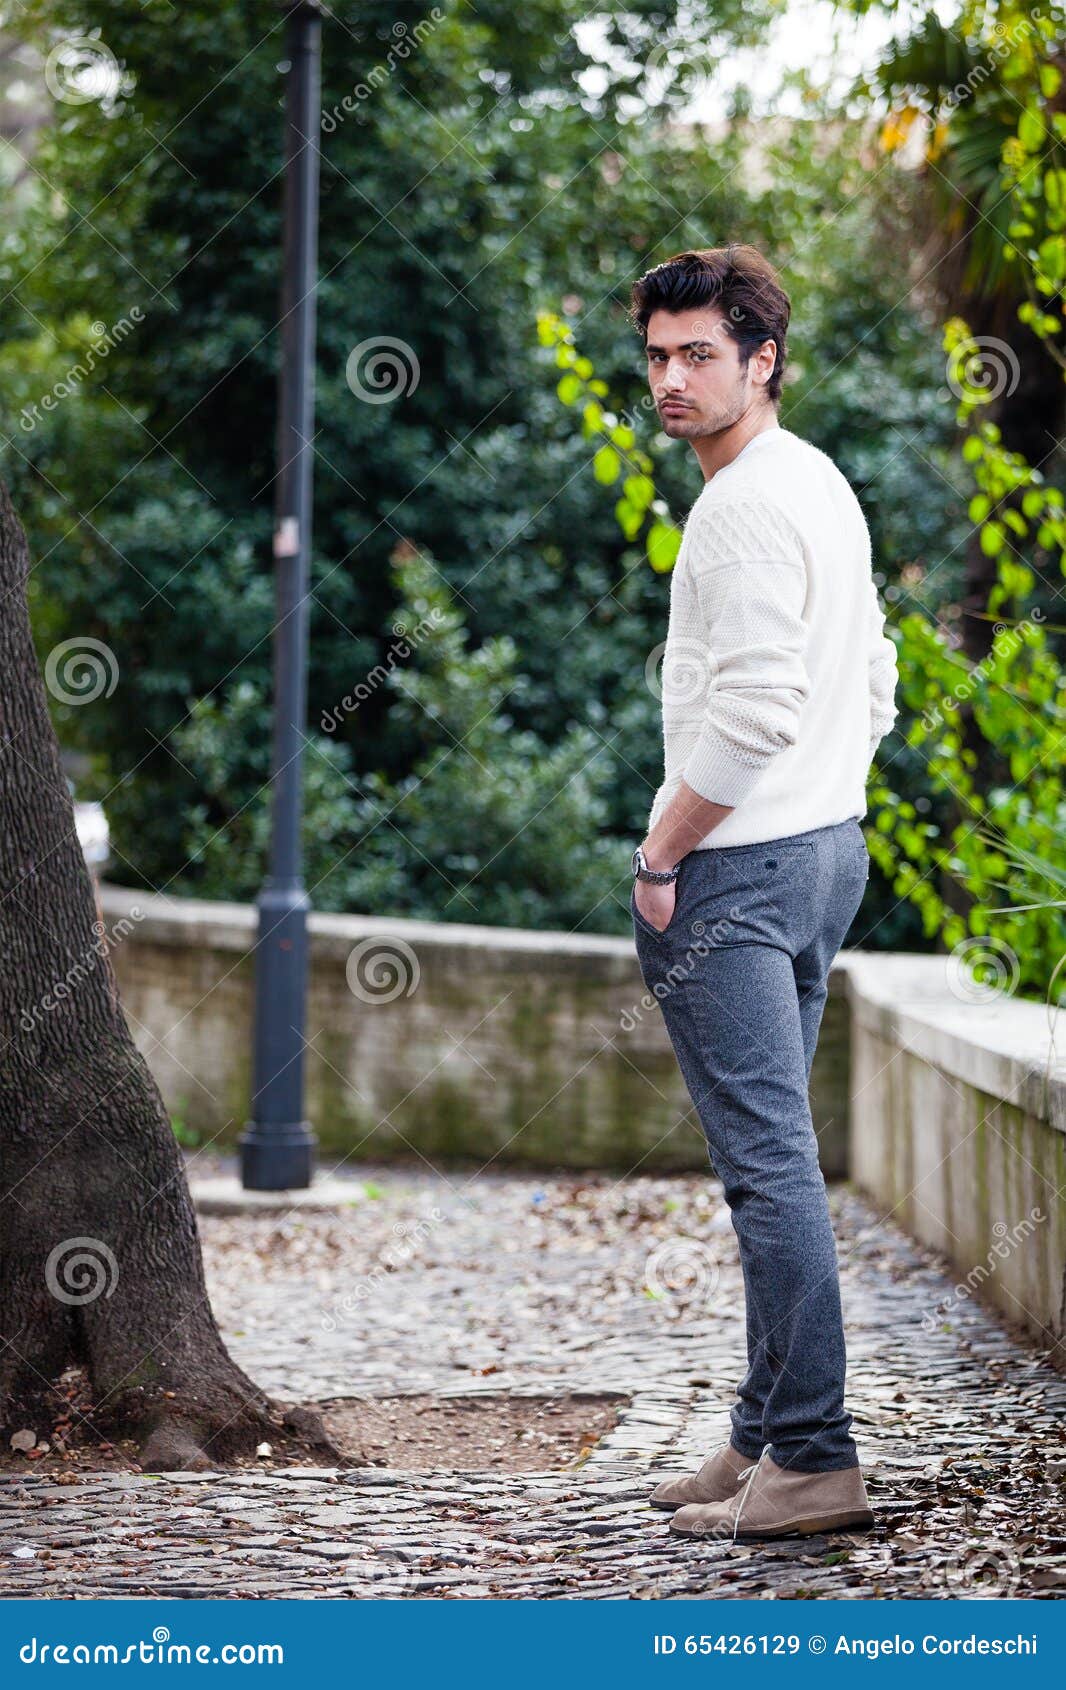 Back Fashion Young Man Standing And Posing Street In A Old Park Stock Image Image Of European Beard 65426129 How to pose as a model? dreamstime com